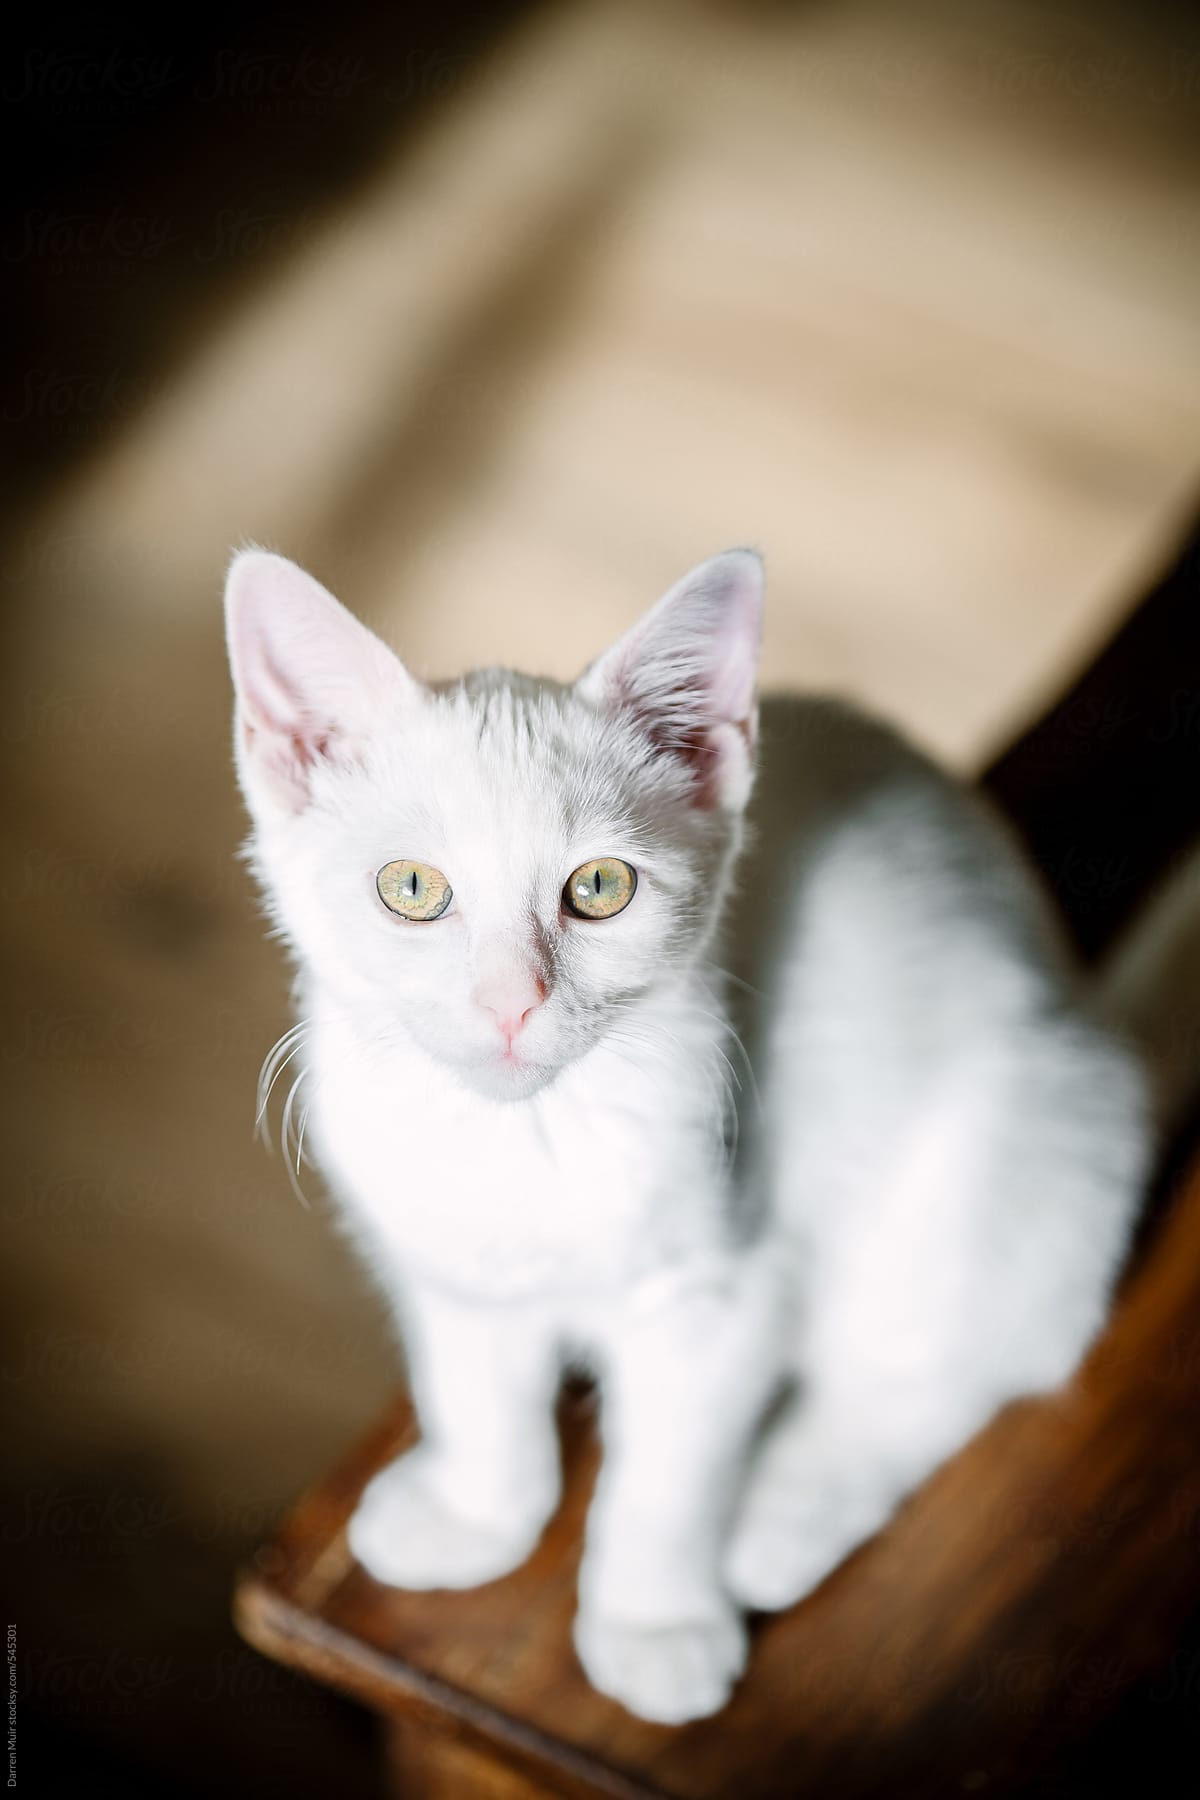 Little white kitten sitting in a patch of sun,looking up at camera.